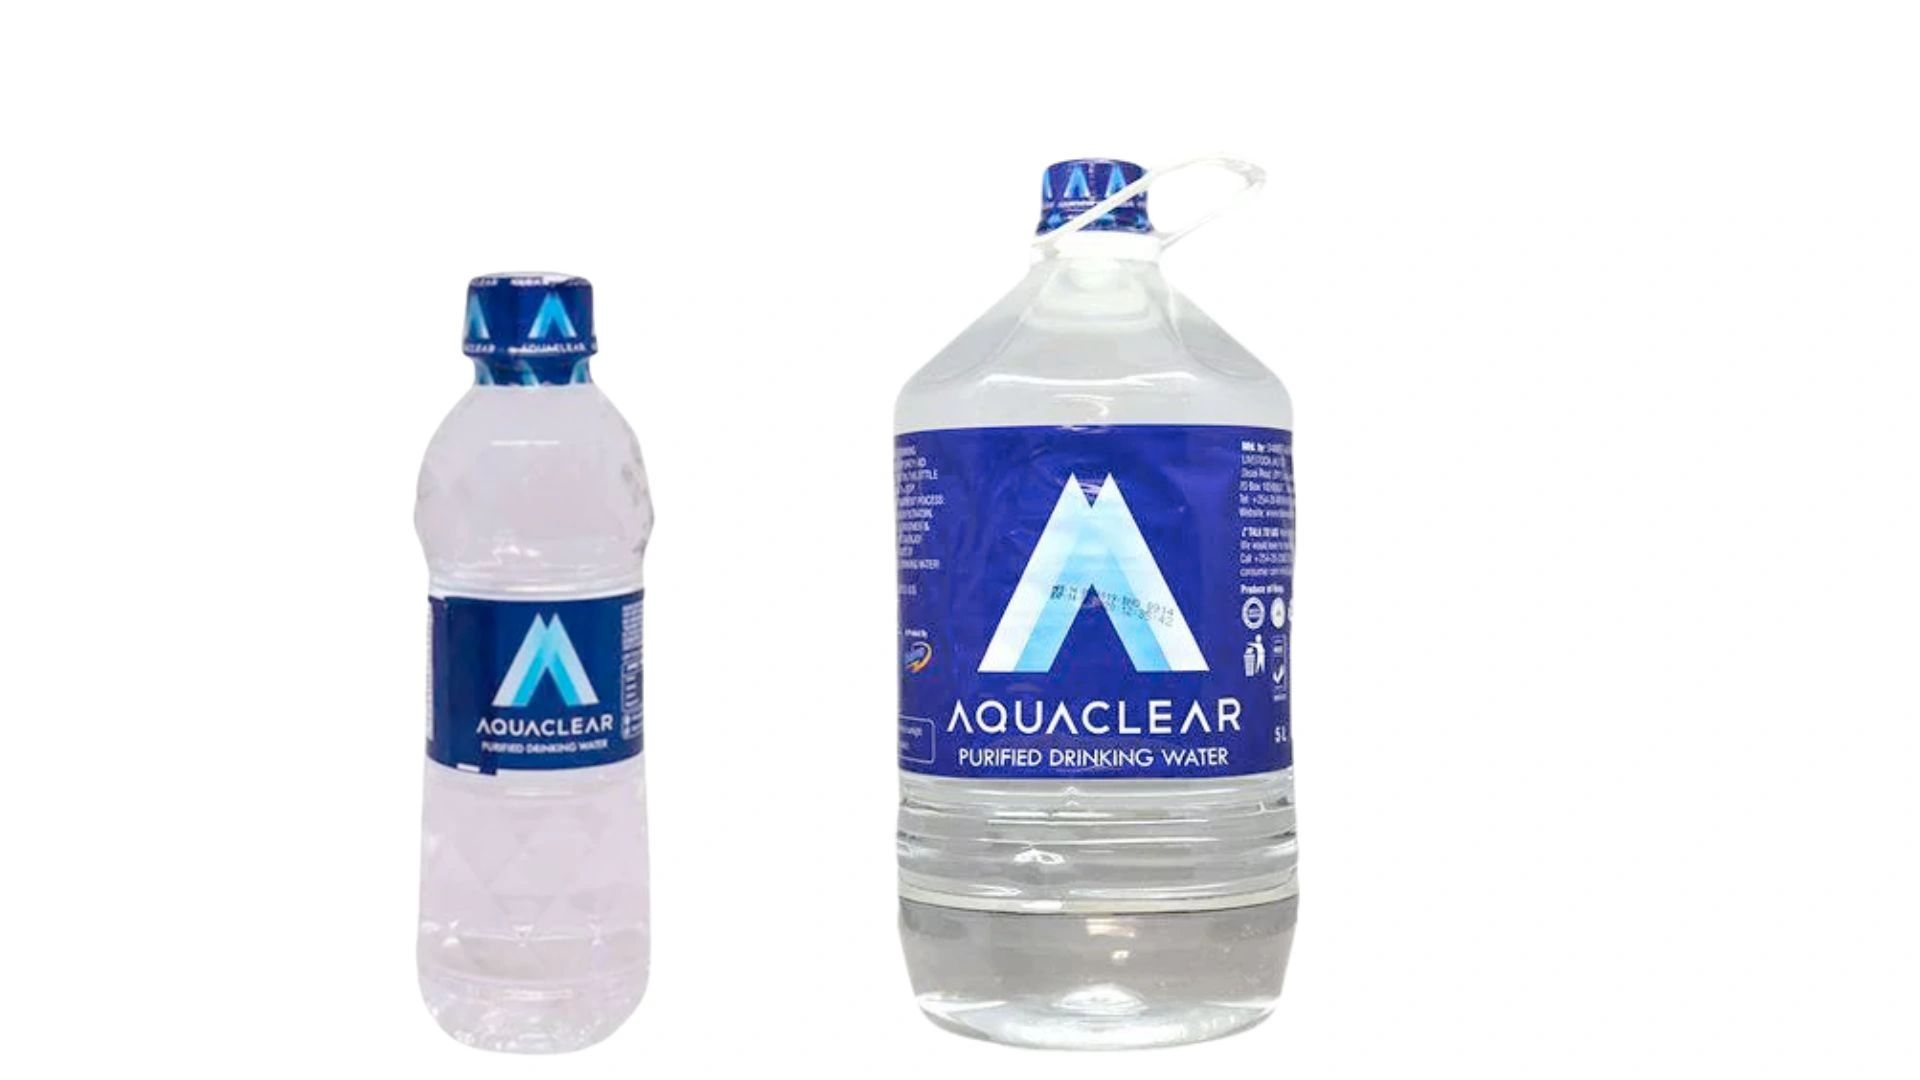 bottled water brands that start with m